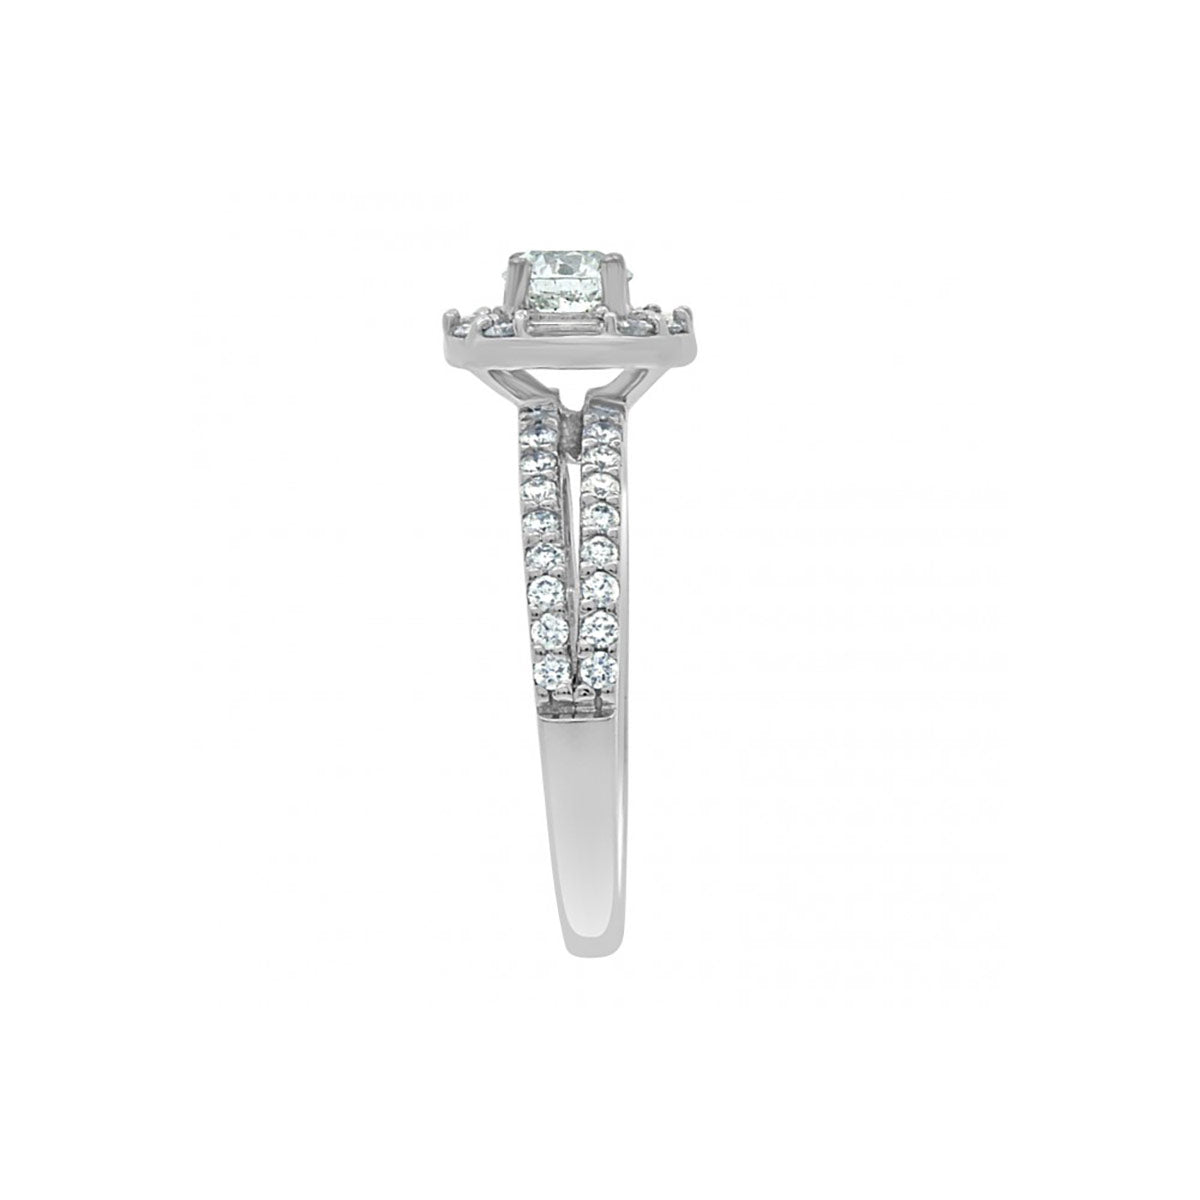 Baguette and Round Diamond Engagement Ring in white gold from a side view